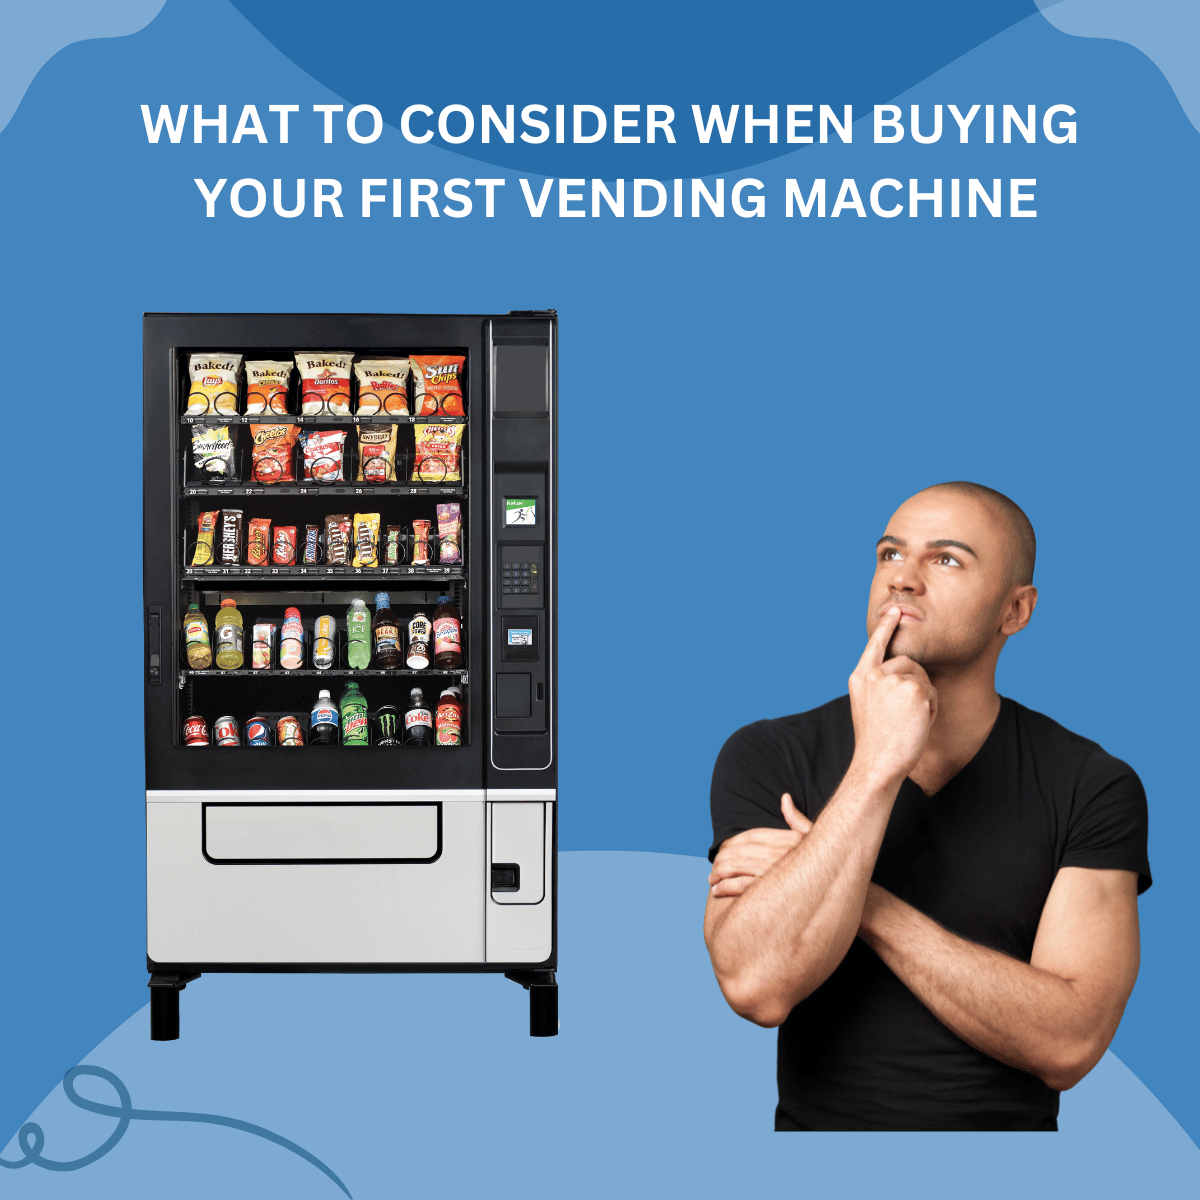 WHAT TO CONSIDER WHEN BUYING YOUR FIRST VENDING MACHINE